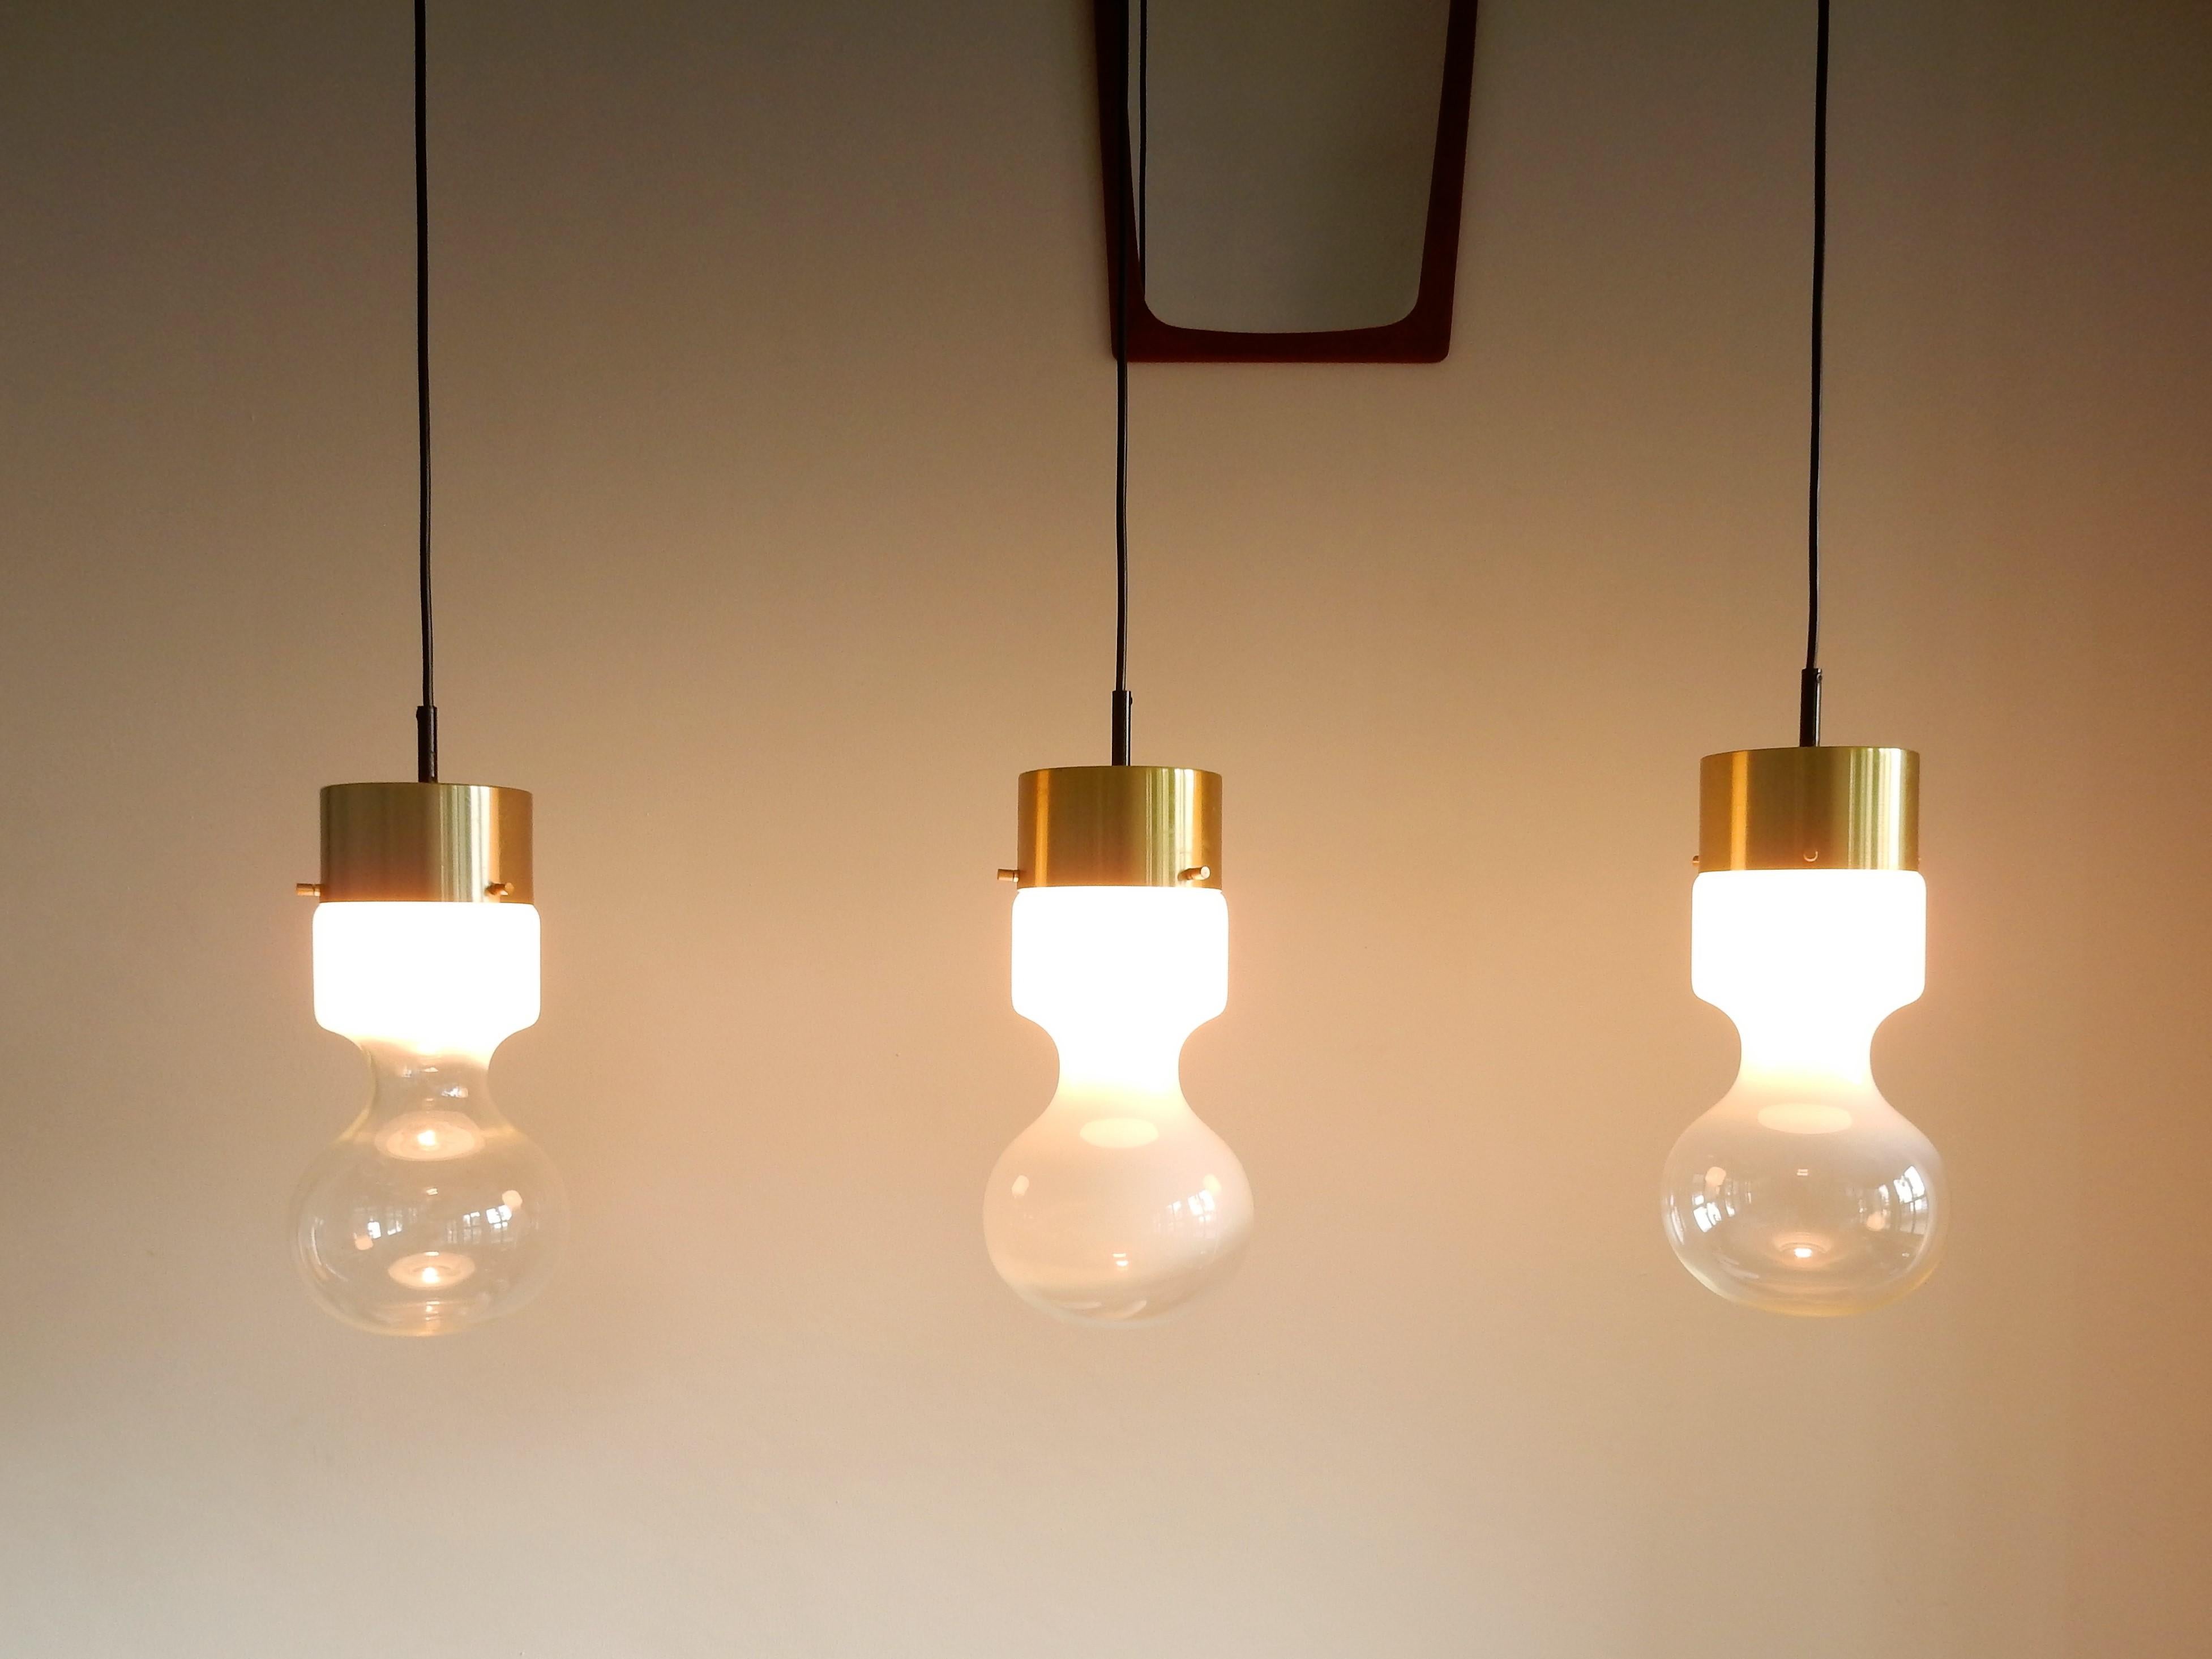 Mid-20th Century Set of 3 'Weerballon' B-1062 Pendant Lamps by RAAK, 1970s The Netherlands